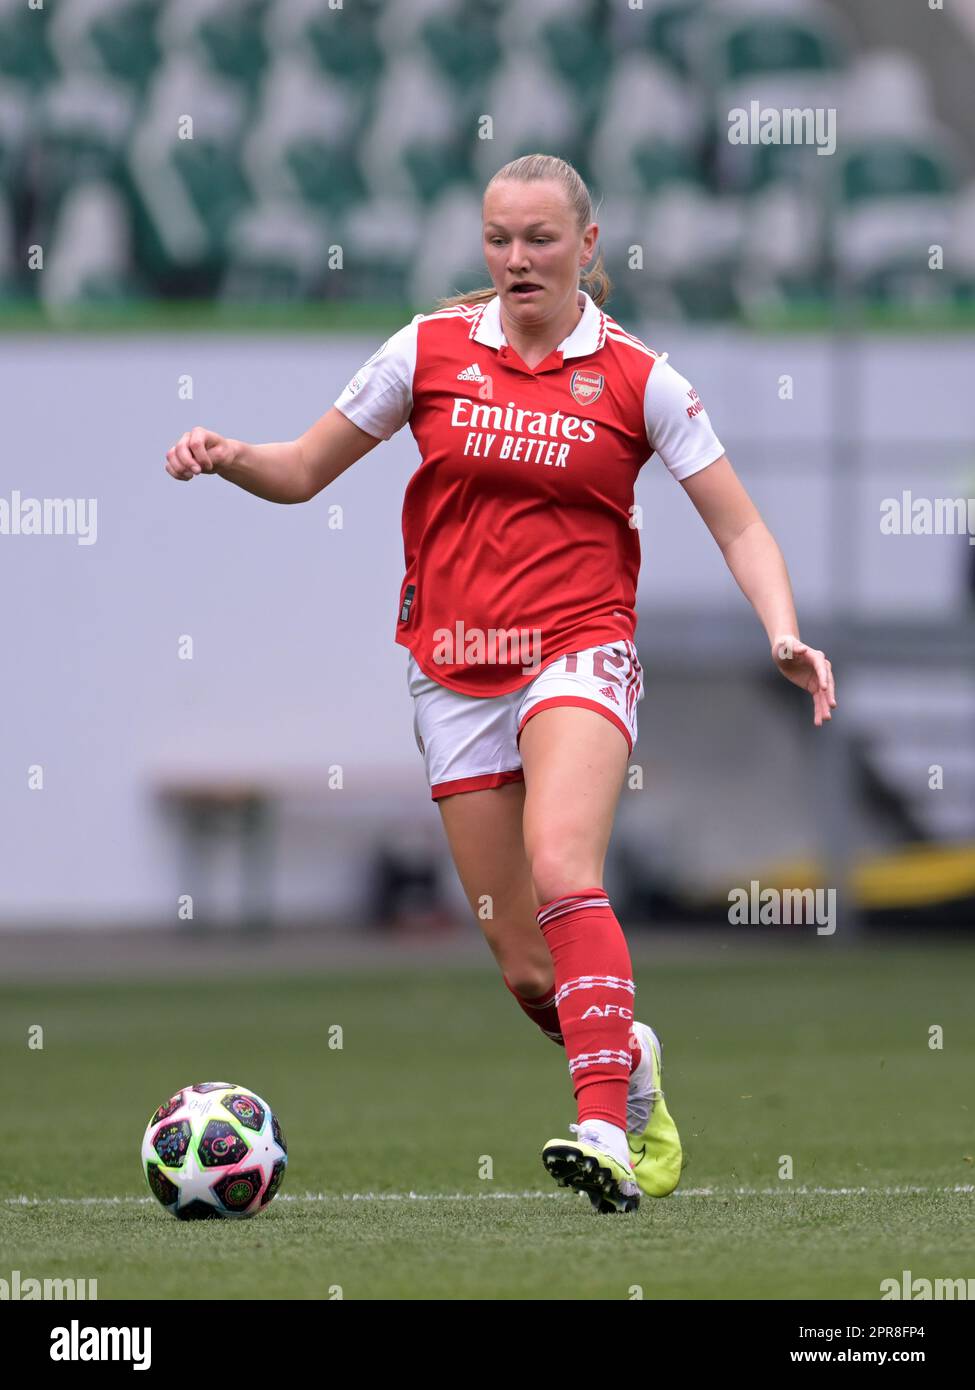 WOLFSBURG -Frida Maanum of Arsenal WFC during the UEFA Champions League Women's Semifinal match between VFL Wolfsburg and Arsenal WFC at VFL Wolfsburg Arena on April 23, 2023 in Wolfsburg, Germany. AP | Dutch Height | GERRIT OF COLOGNE Stock Photo